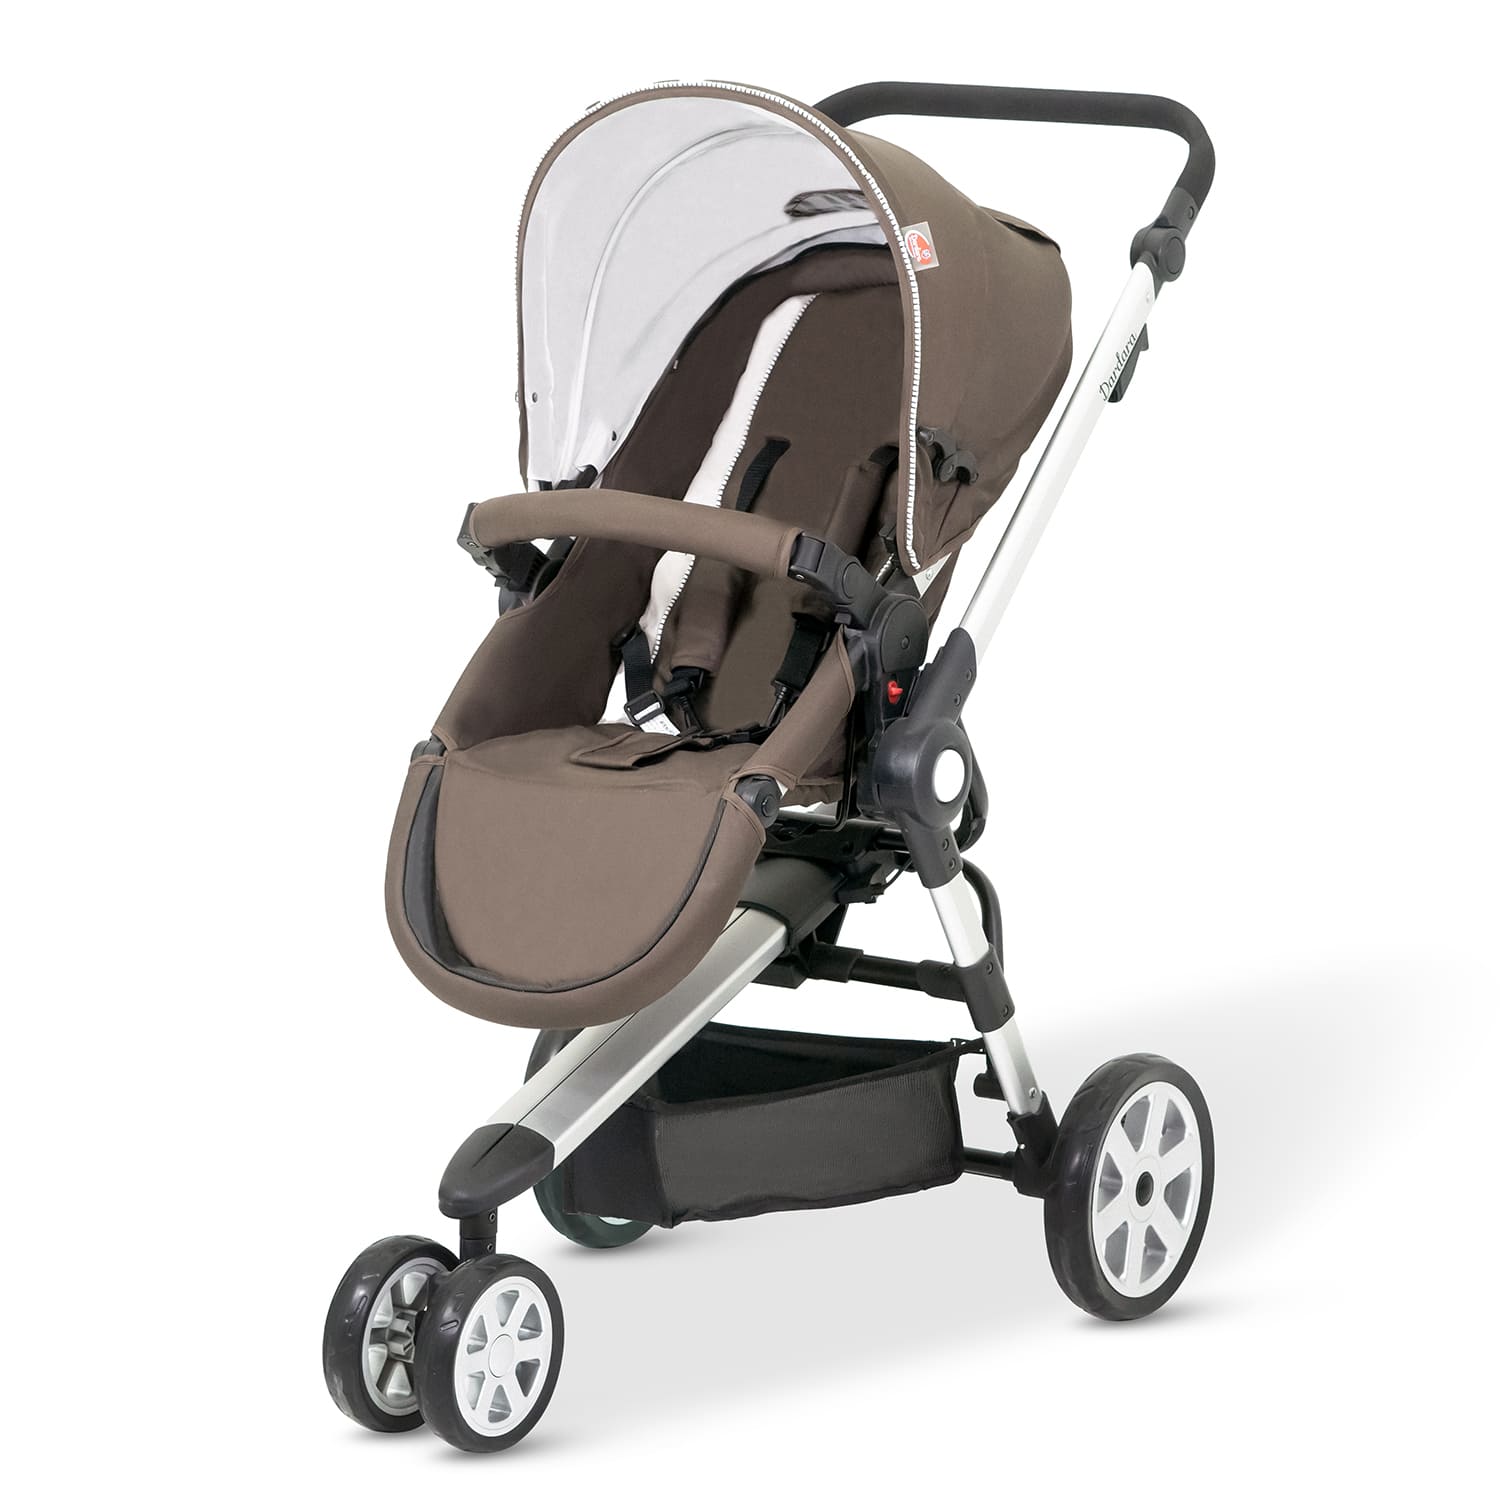 Cabin Stroller for Babies - Compact and Stylish Baby Travel Solution